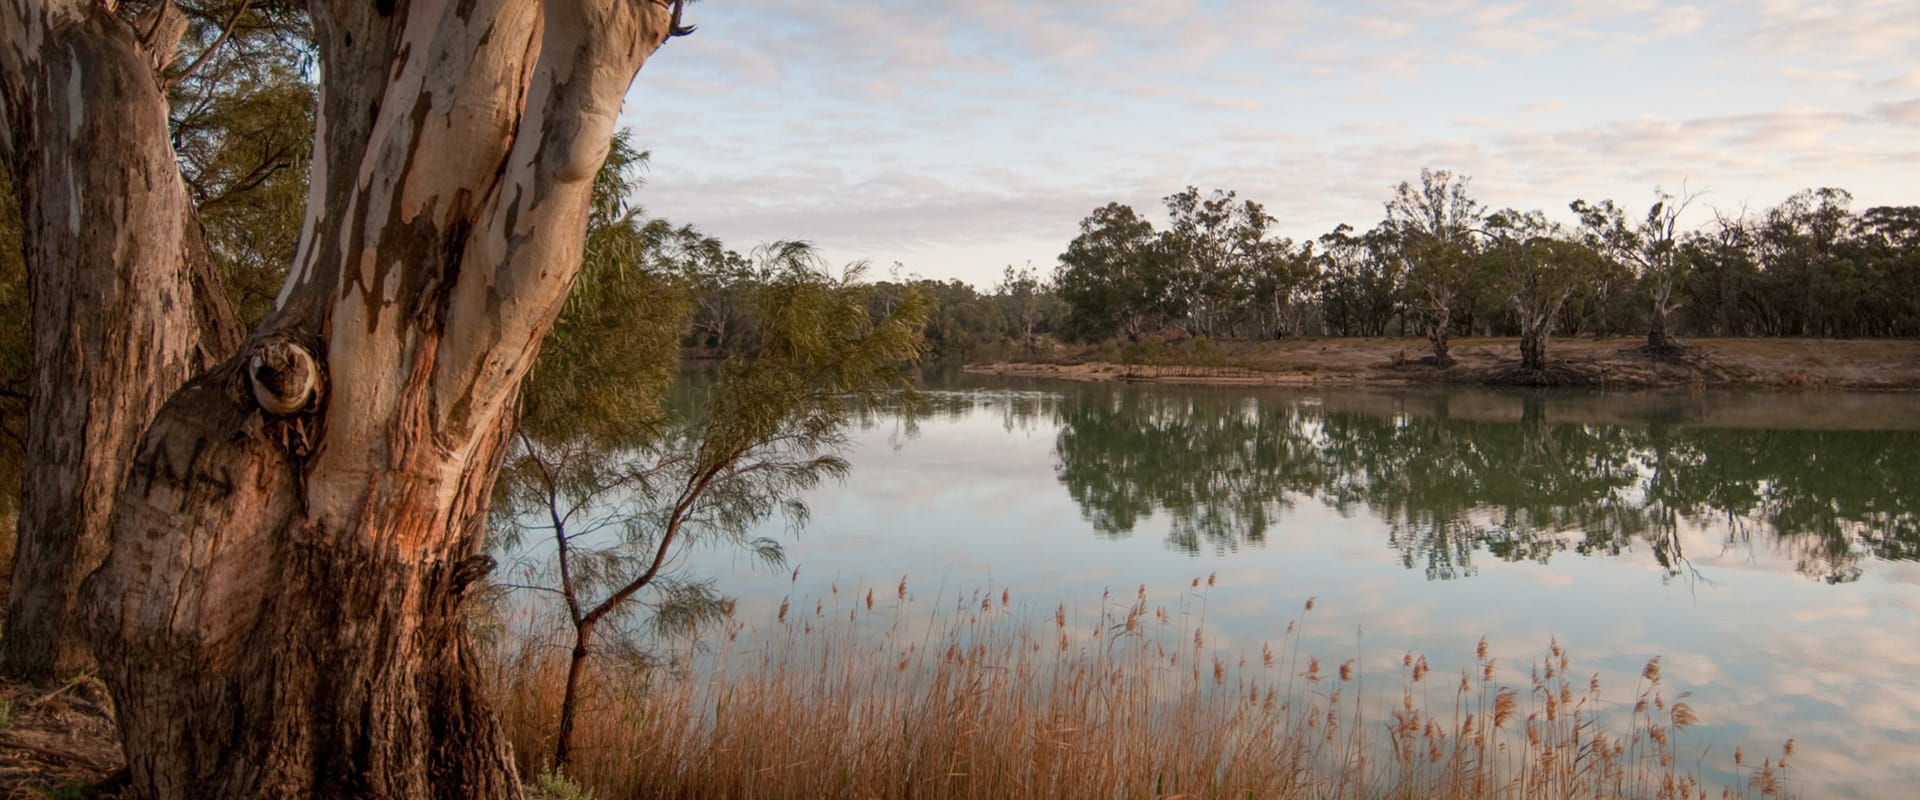 A serene river flows through rugged bushland, surrounded by native trees and grass.